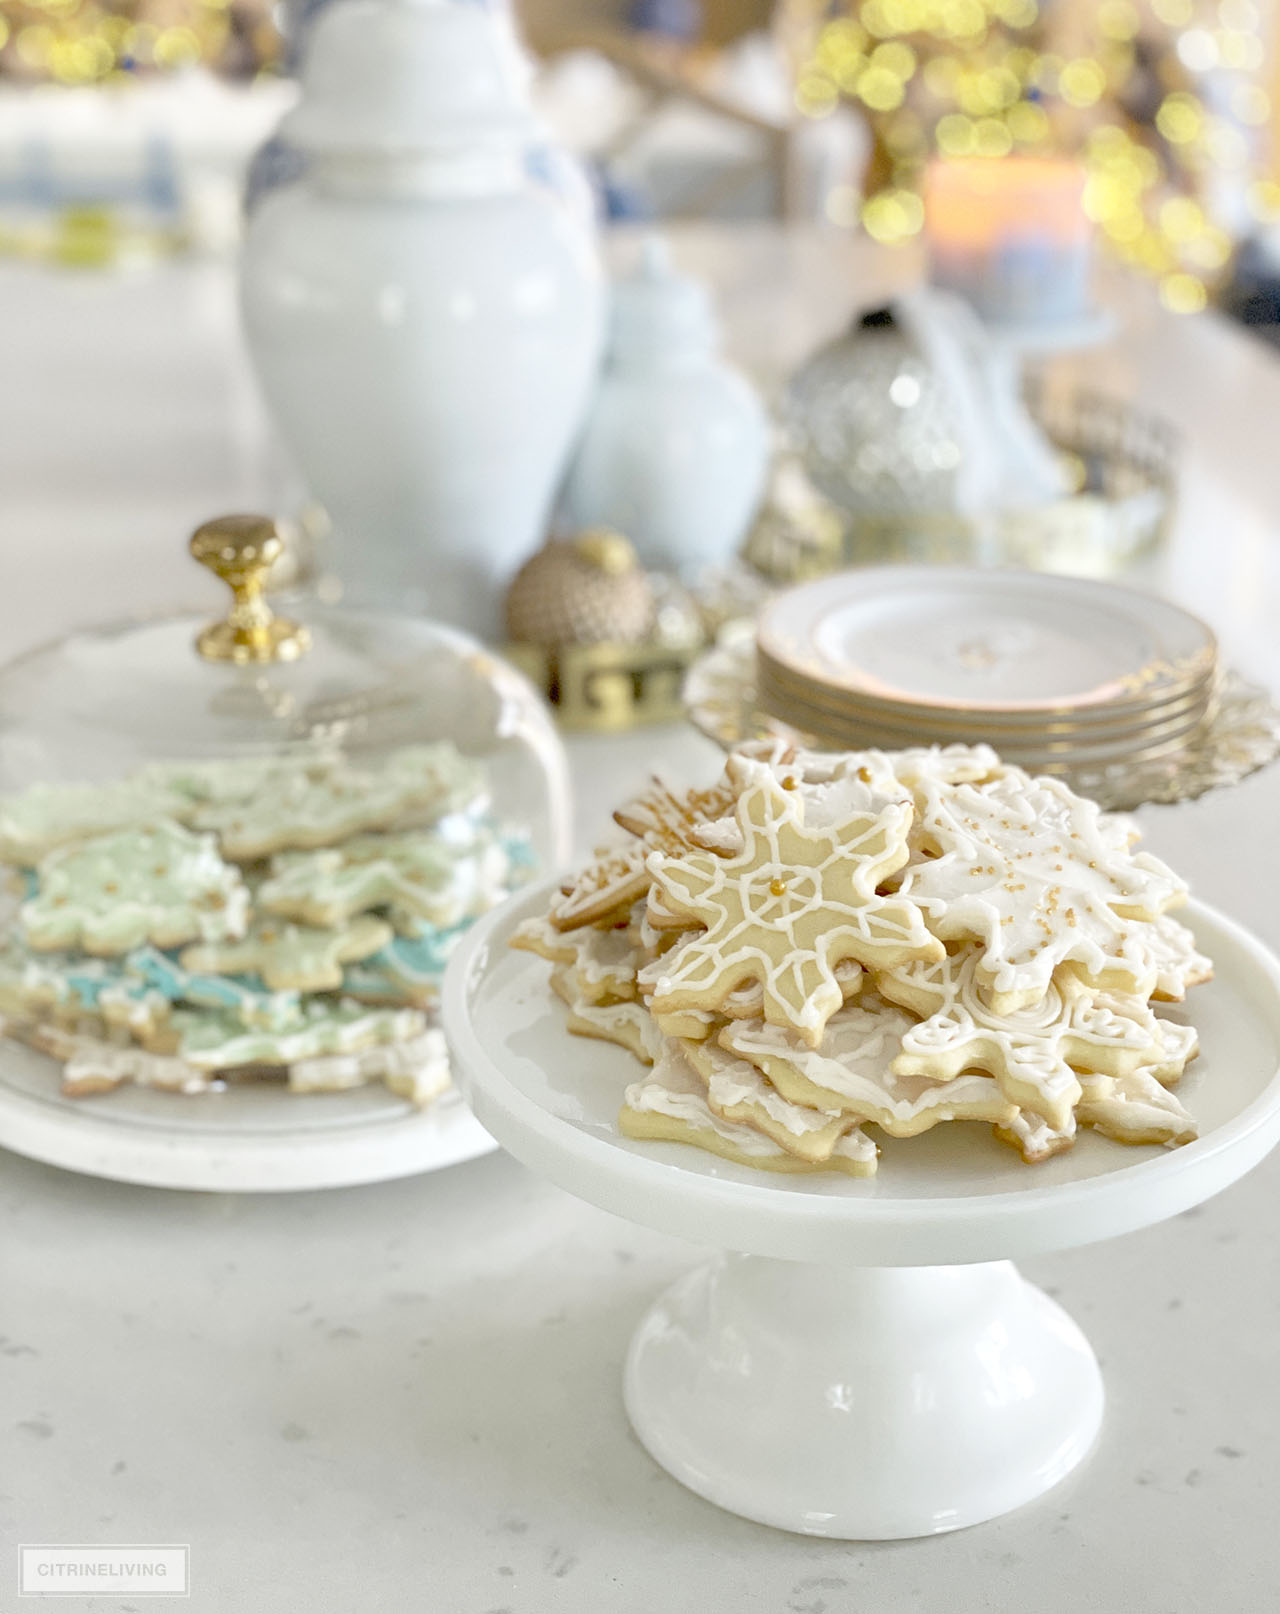 Beautiful frosted Christmas cookies displayed on pretty cake stands is the perfect festive touch!